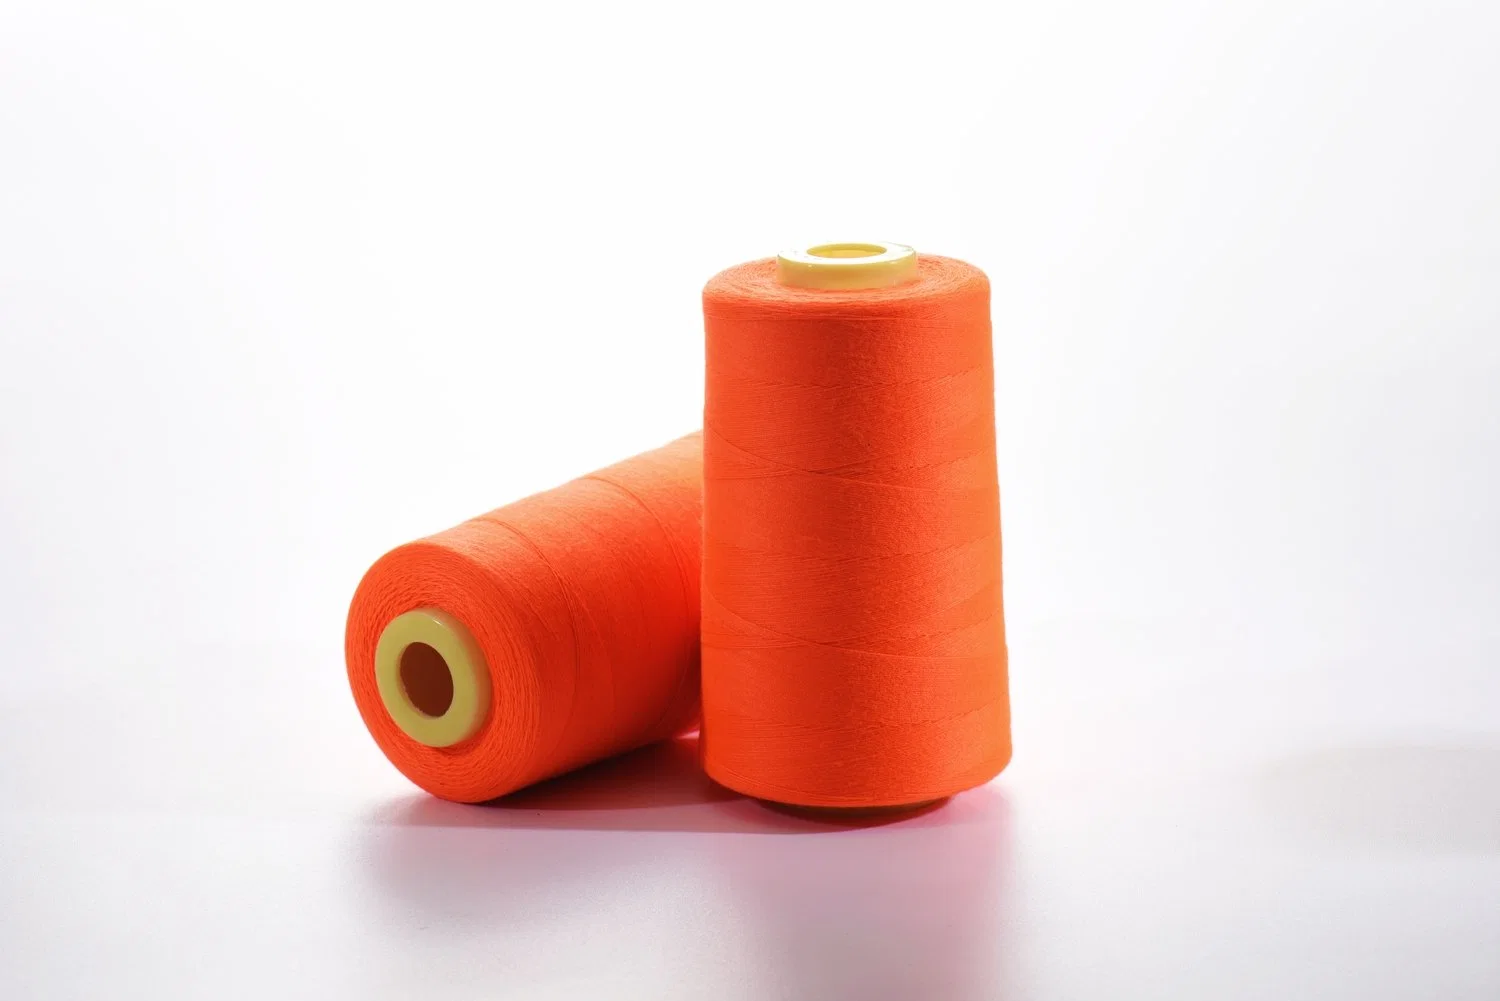 Water Resistant for Tents, Sailling Gear, Sports Equipment (TEX20) 60s/2 3000y Water-Proof Sewing Thread